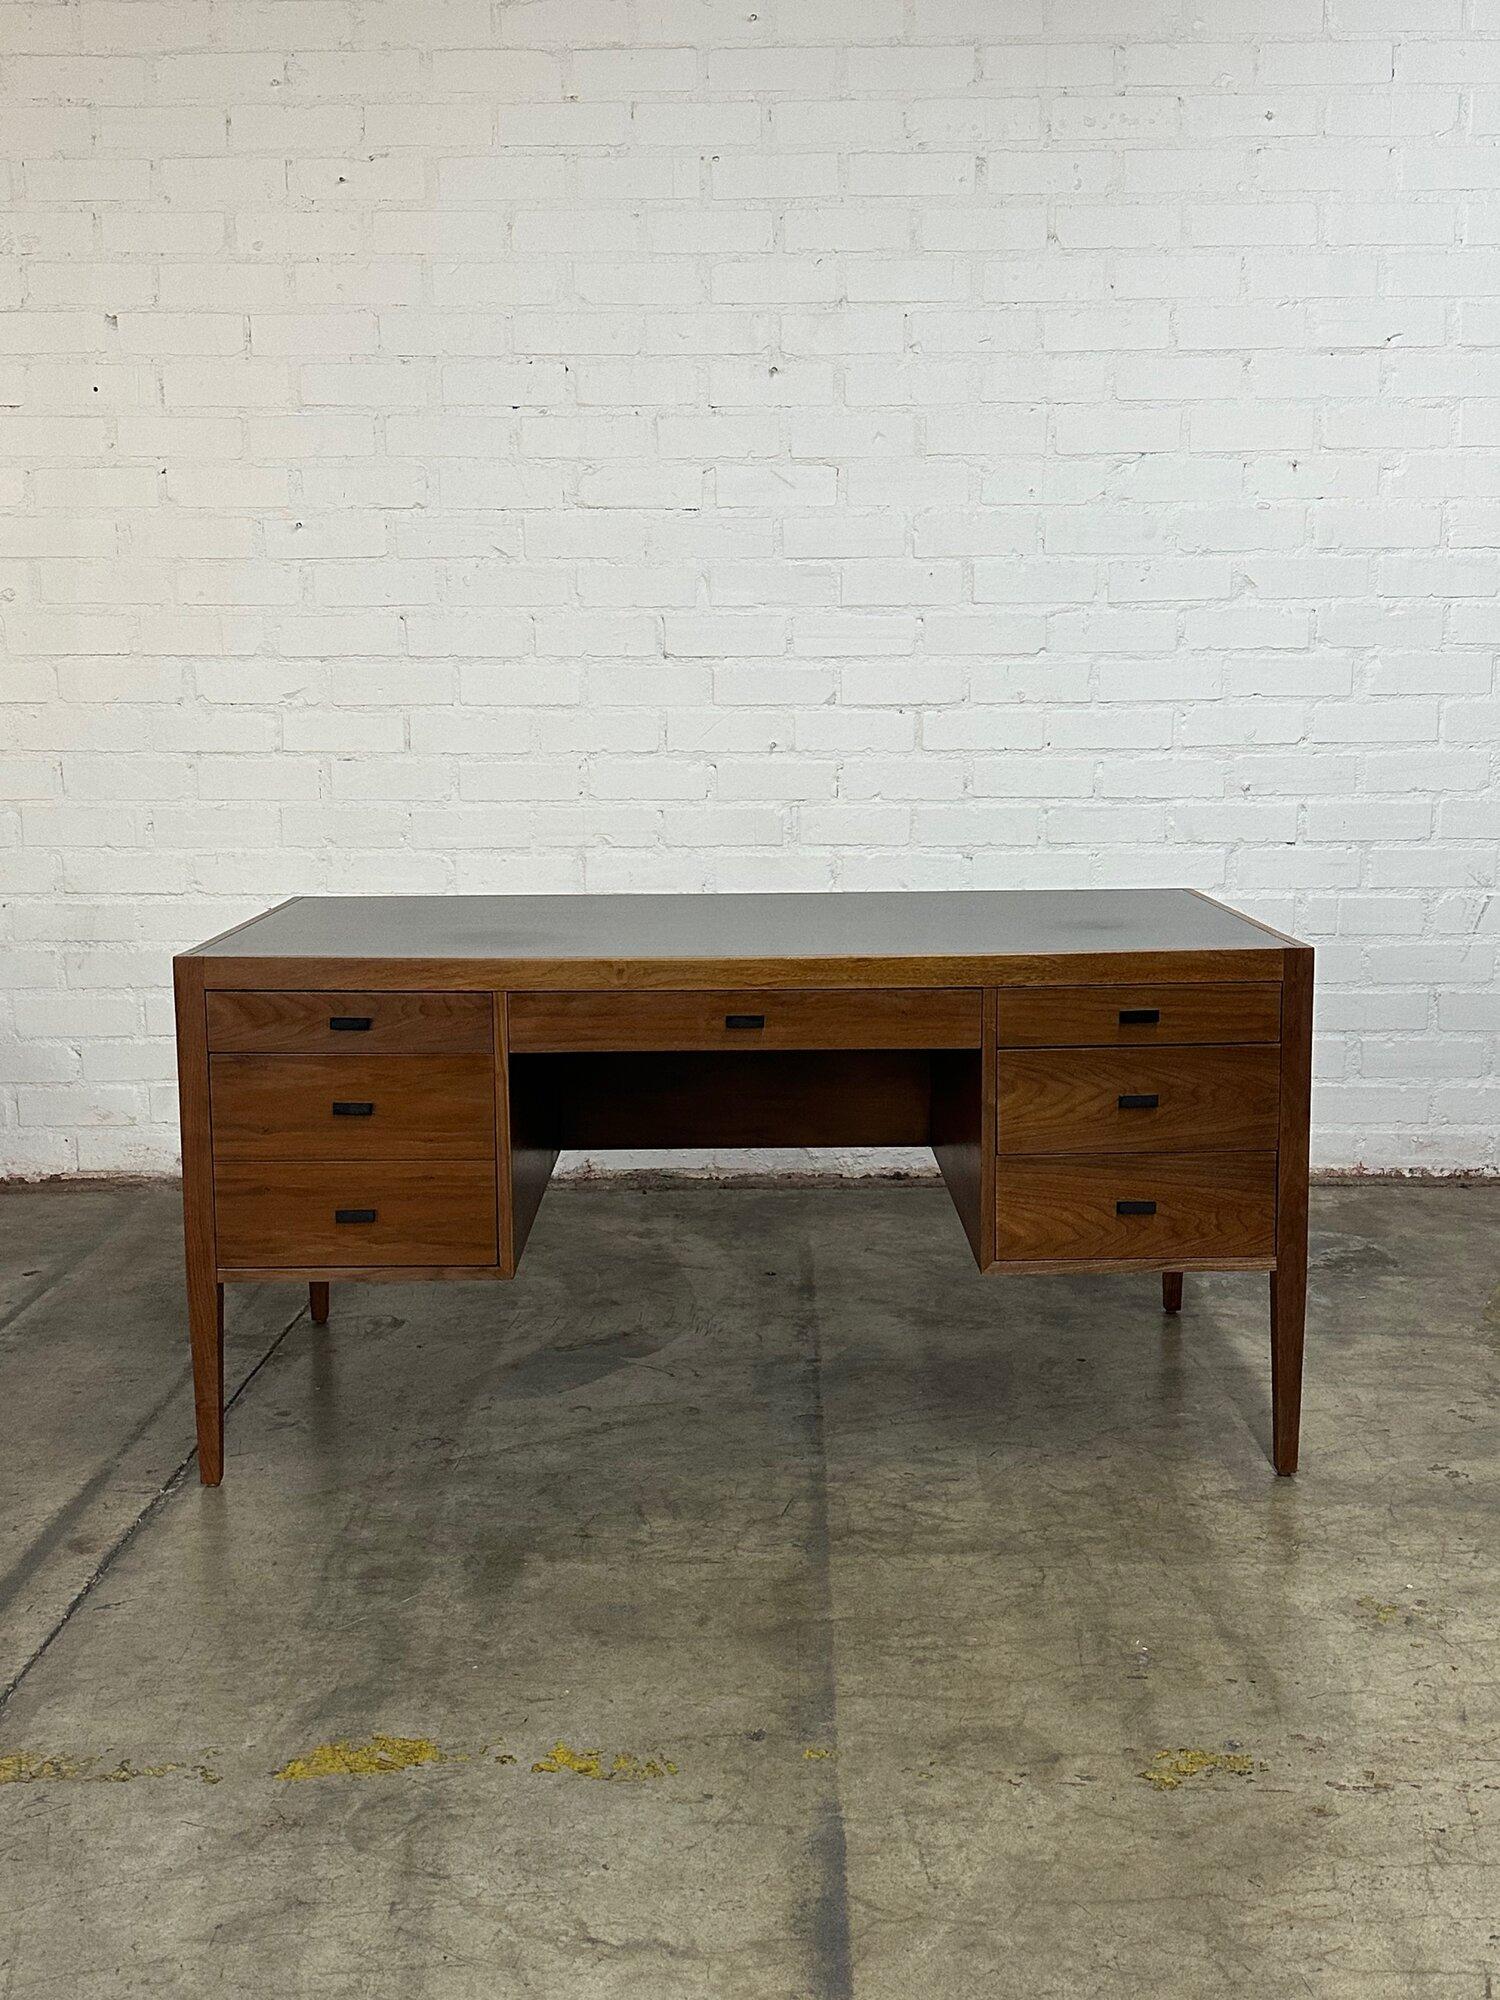 W60 D30 H29 Knee Width 25 Knee Clearance23.5

Fully restored executive mid century desk in the manner of Cavalier. Item is structurally sound and fully functional. Item features original hardware and laminate like surface.